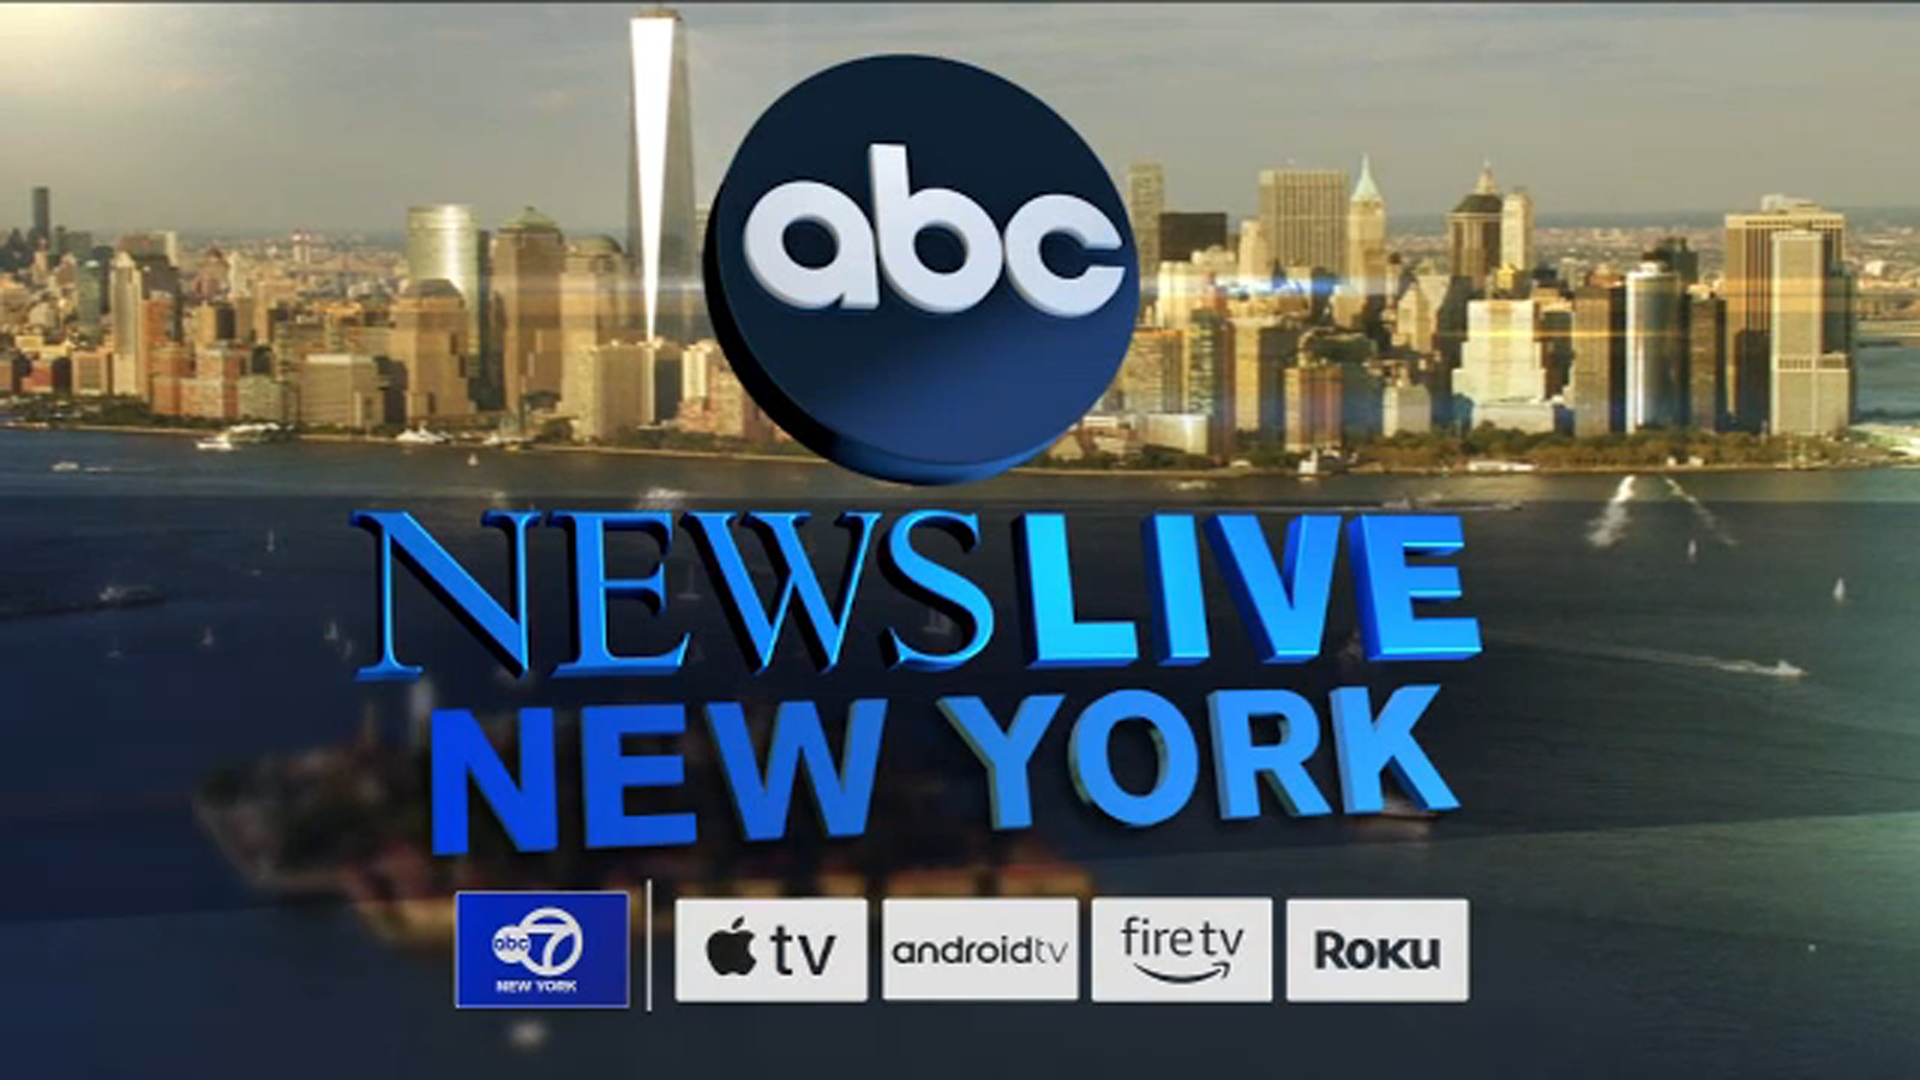 How to watch ABC News Live New York